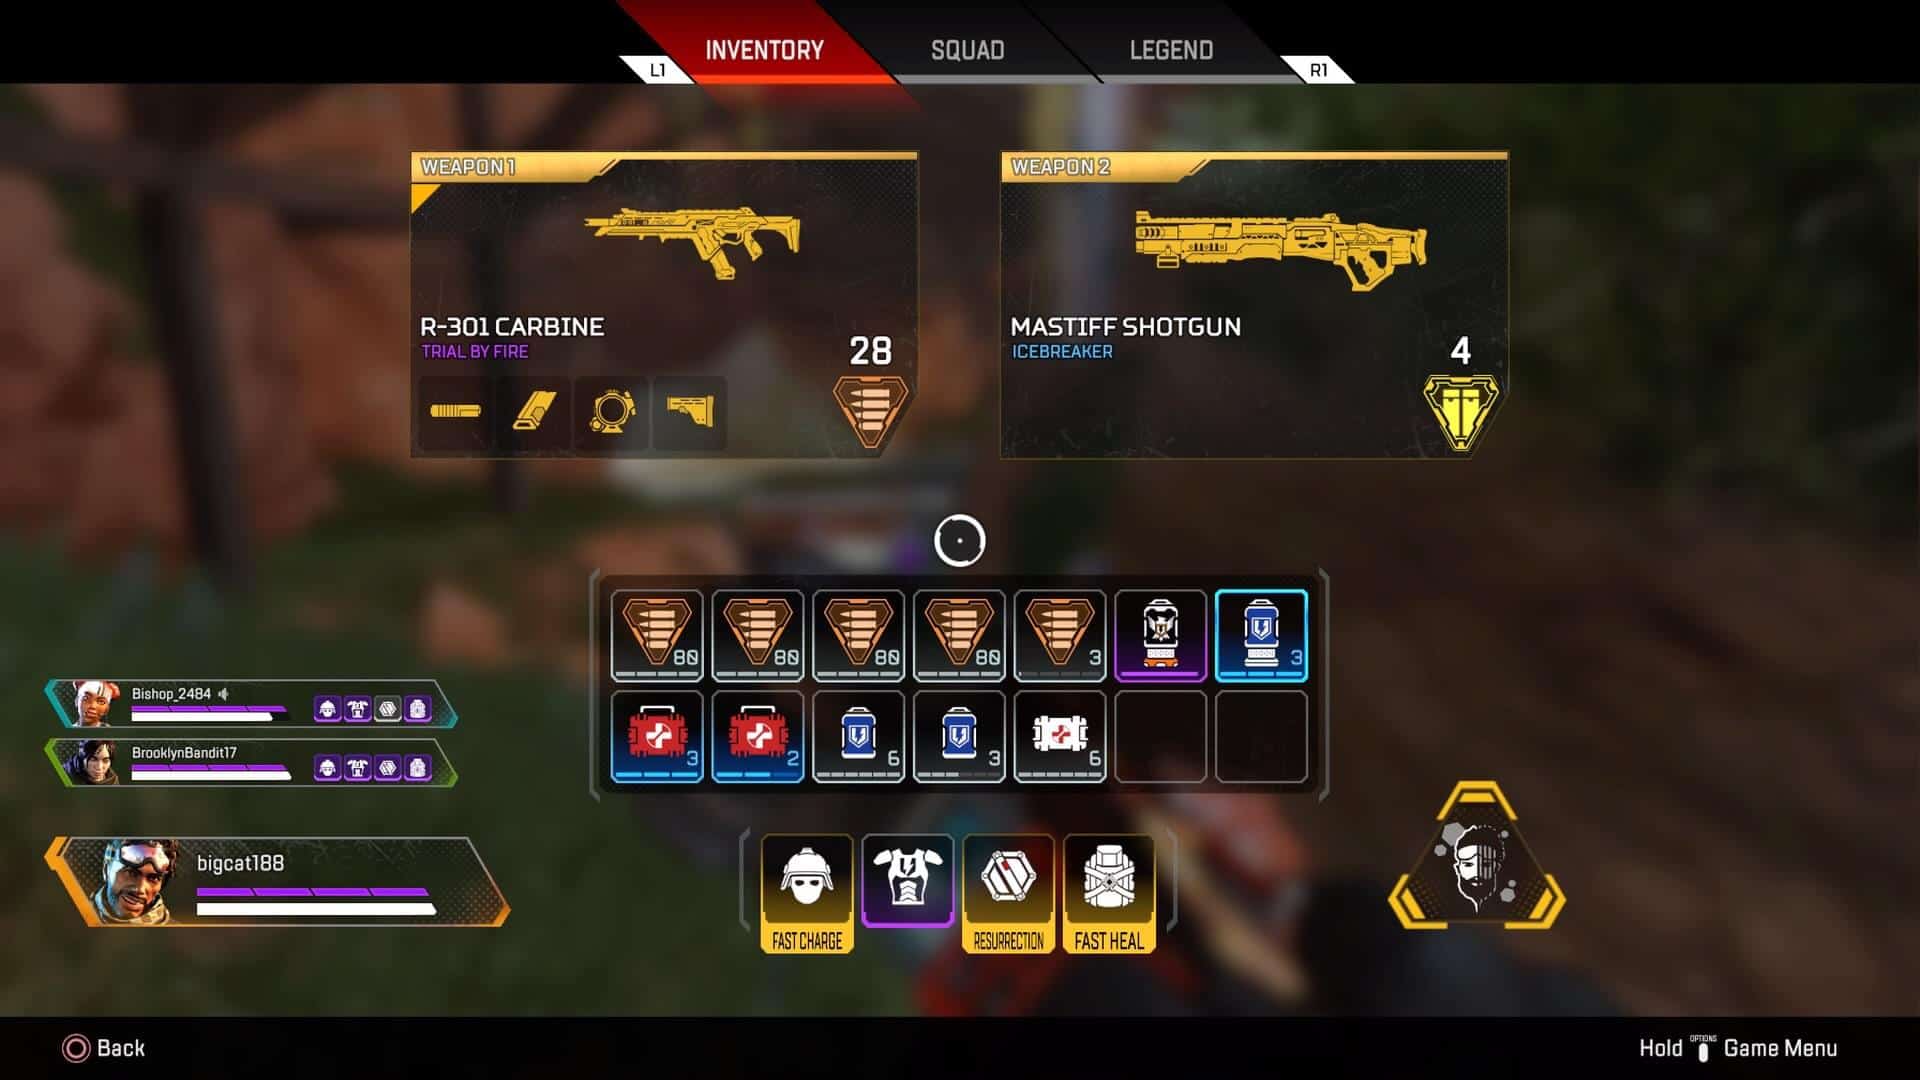 Apex Legends gold items abilities: Self revive shield, auto charging armor, 50% faster healing, and more